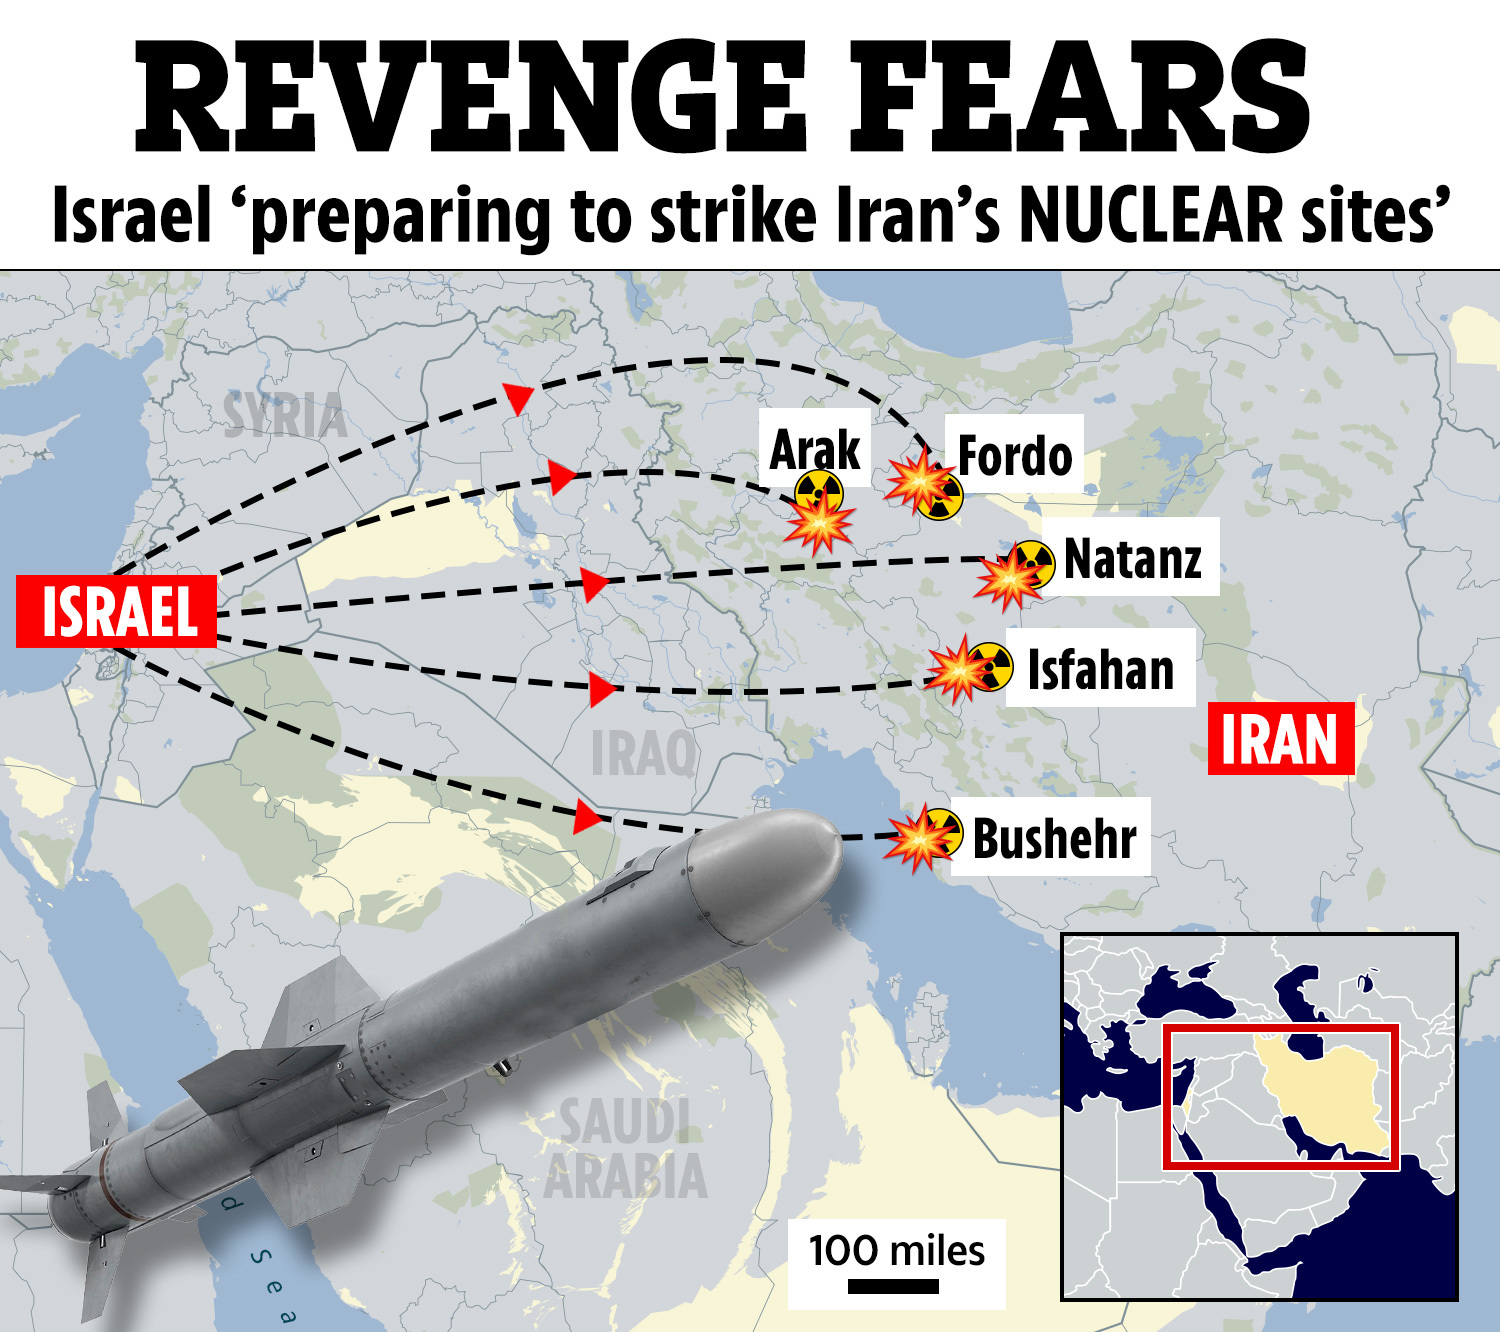 Israel's plans come after Iran threatened to retaliate and bragged about its weapons